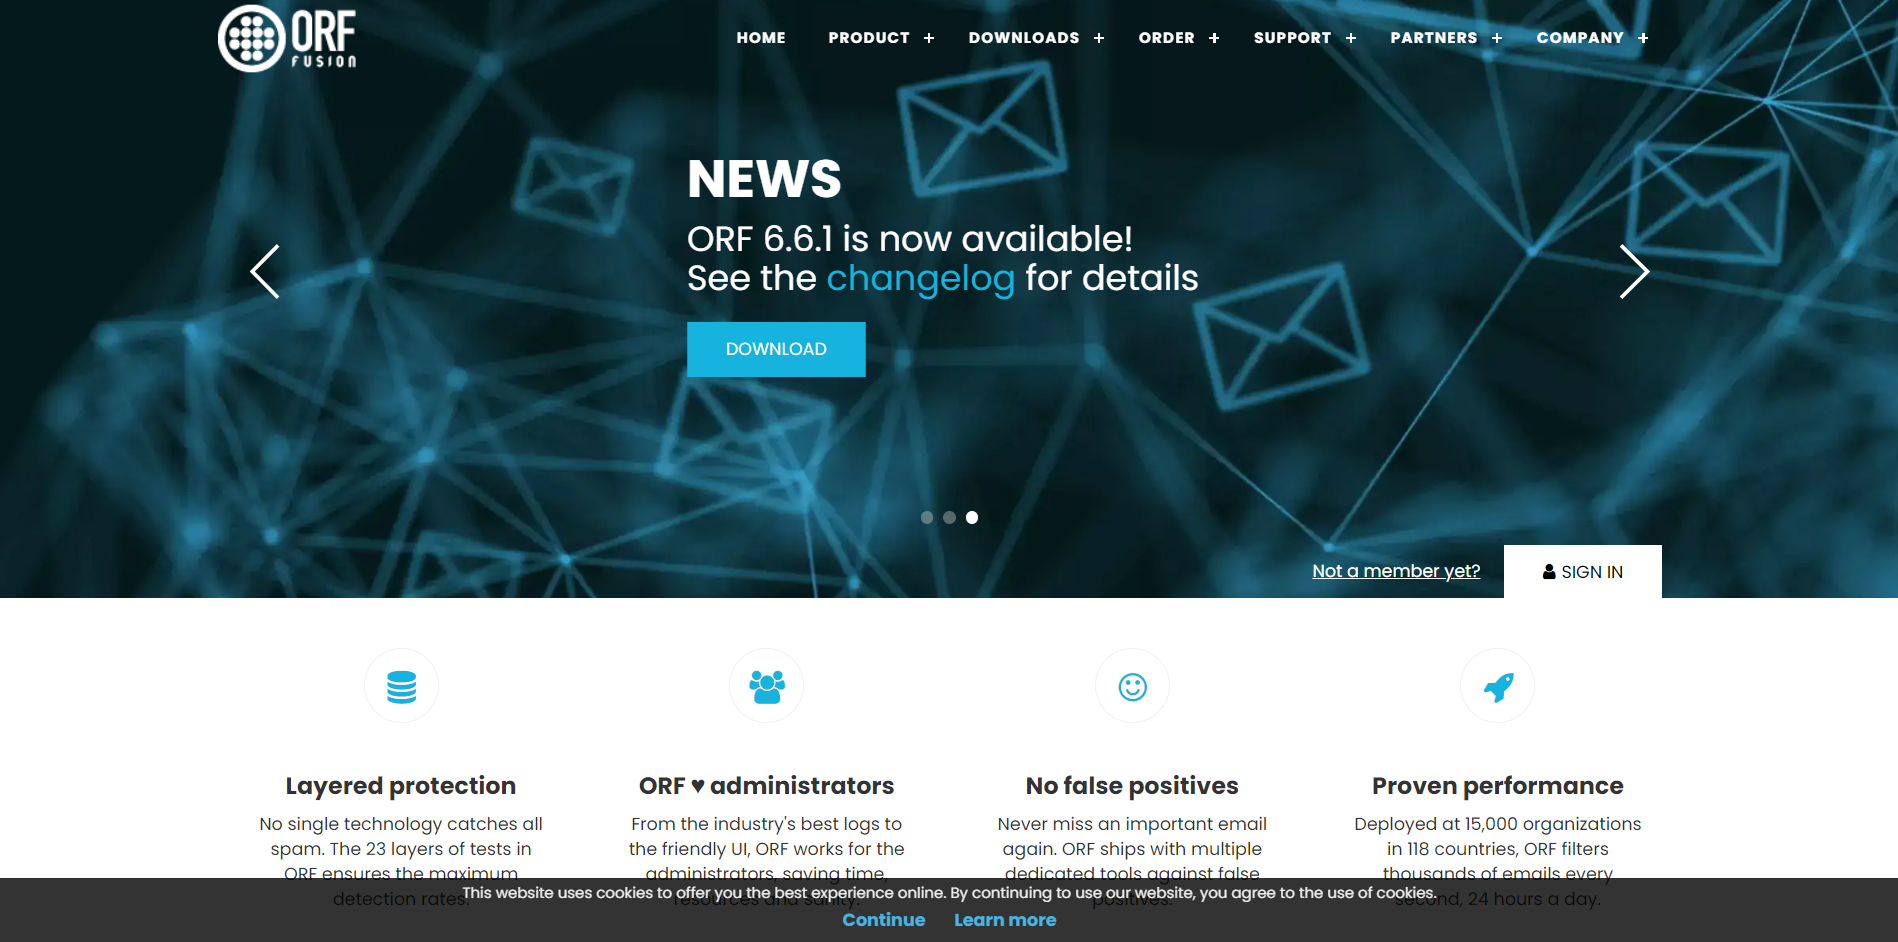 ORF Fusion main page